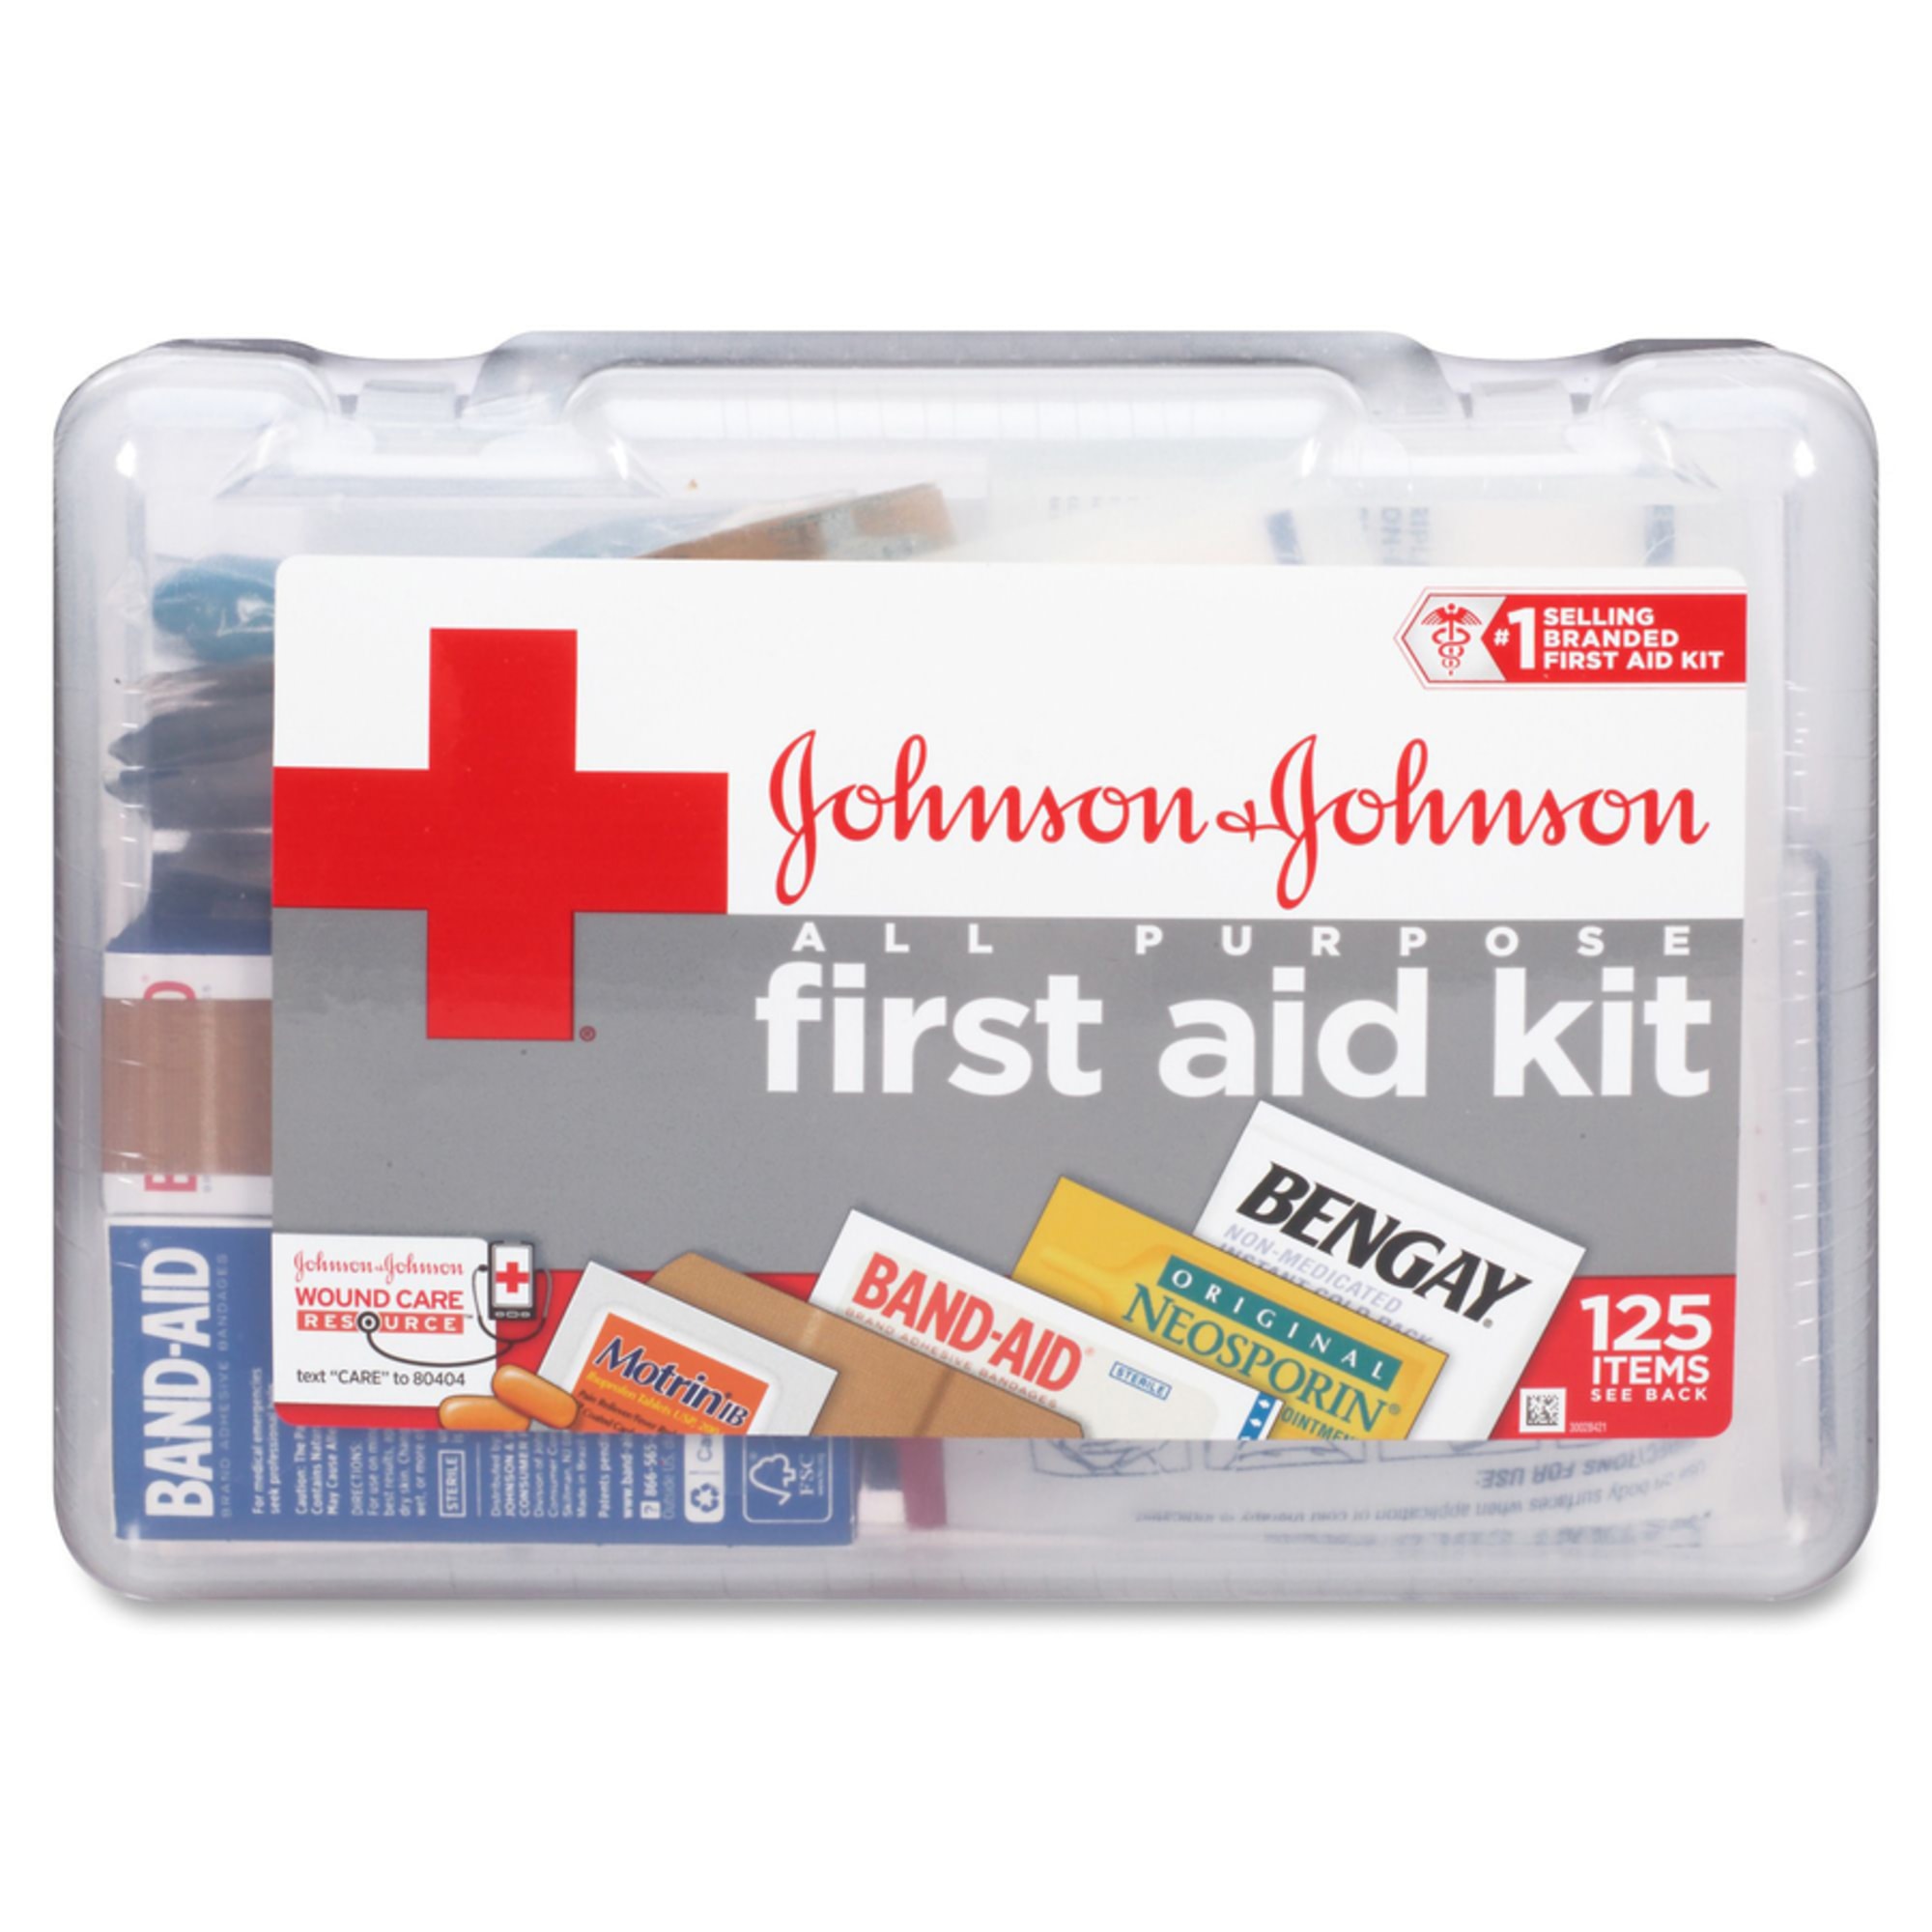 All Purpose 125-item First Aid Kit - image 3 of 3